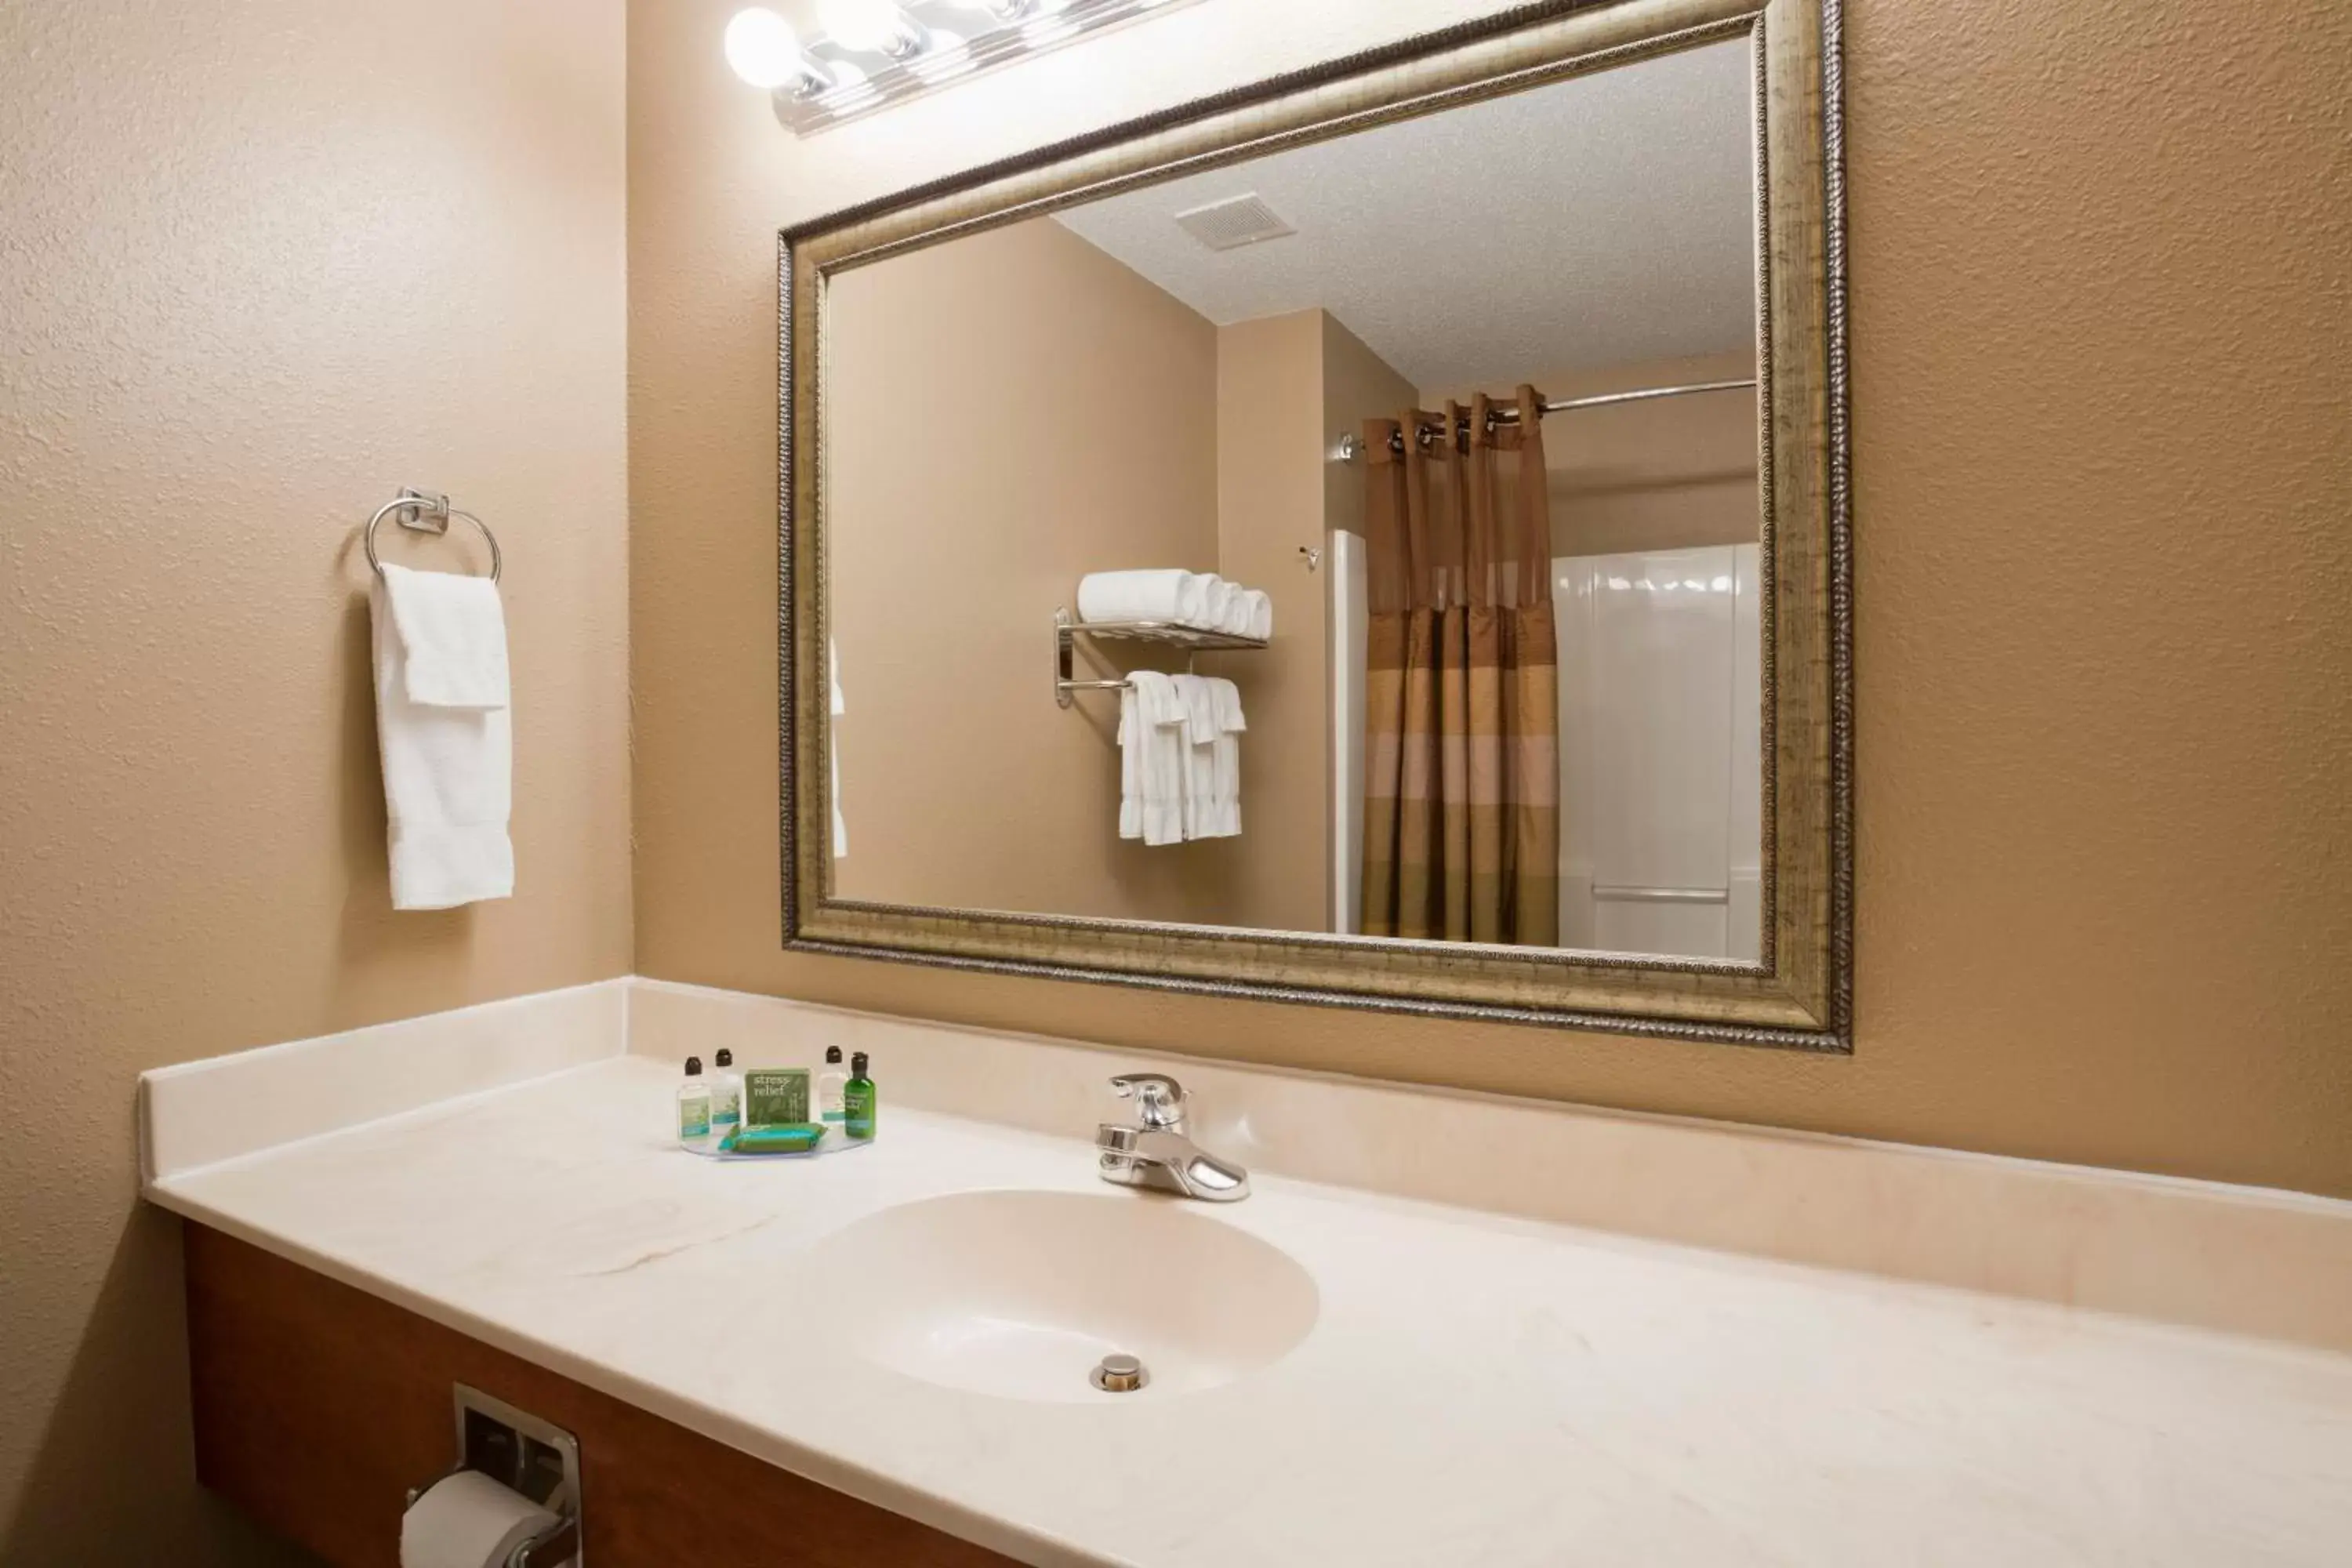 Bathroom in GrandStay Residential Suites Hotel - Eau Claire